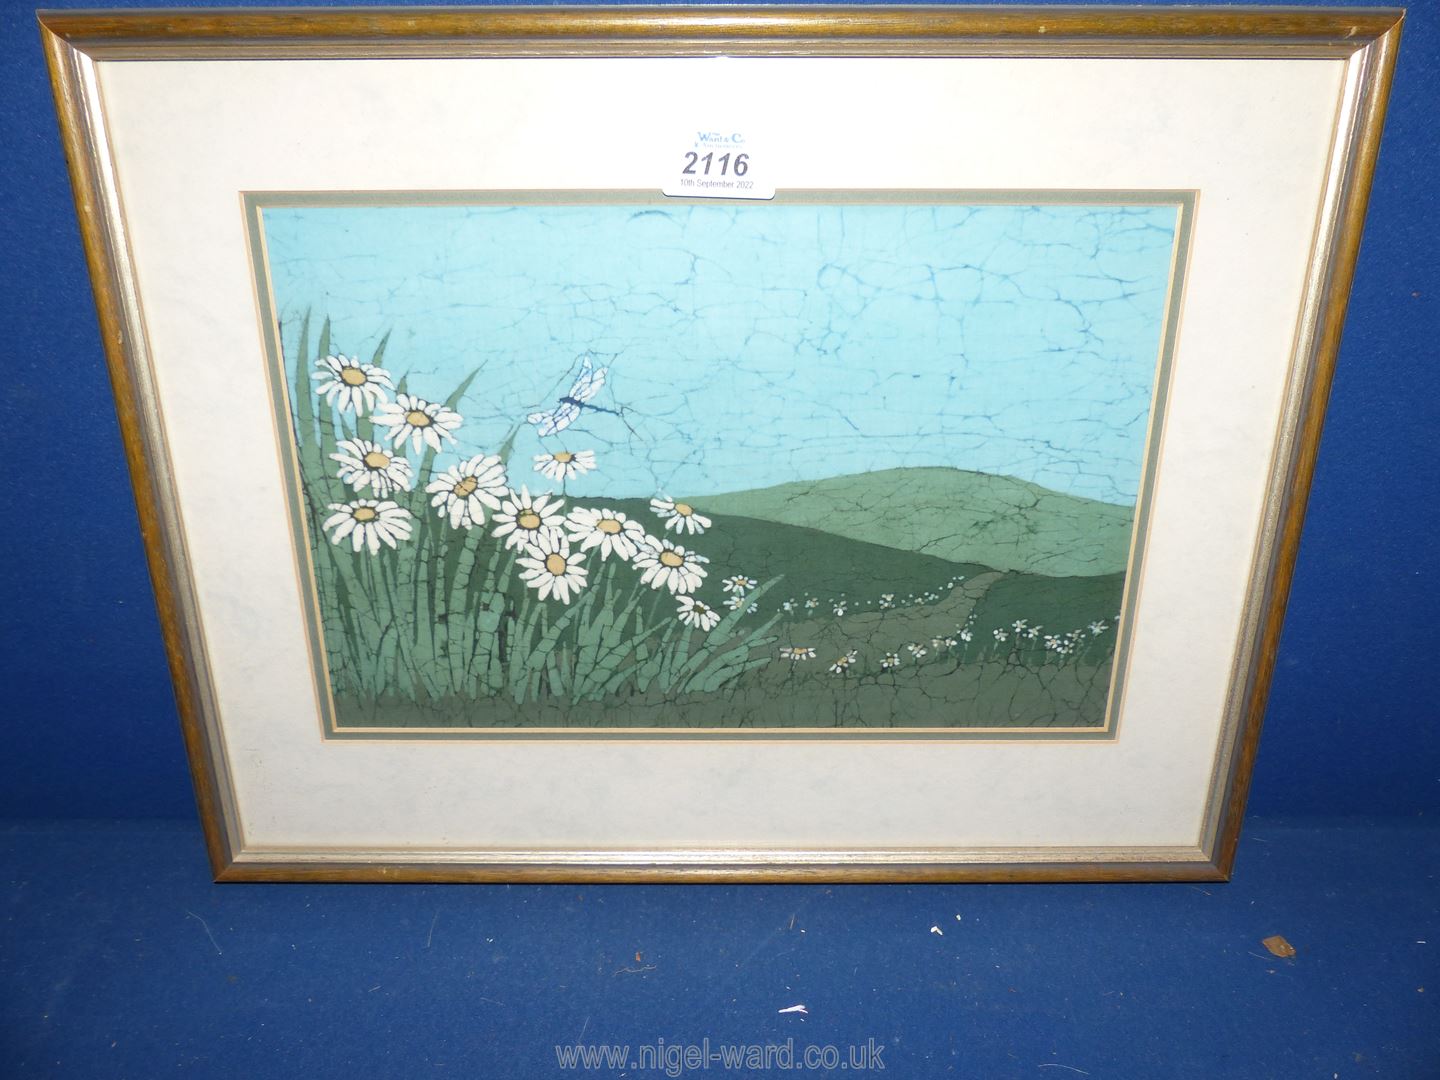 A framed and mounted Batik painting by the artist Buffy Robinson titled 'Daises and Dragonfly 1991'.